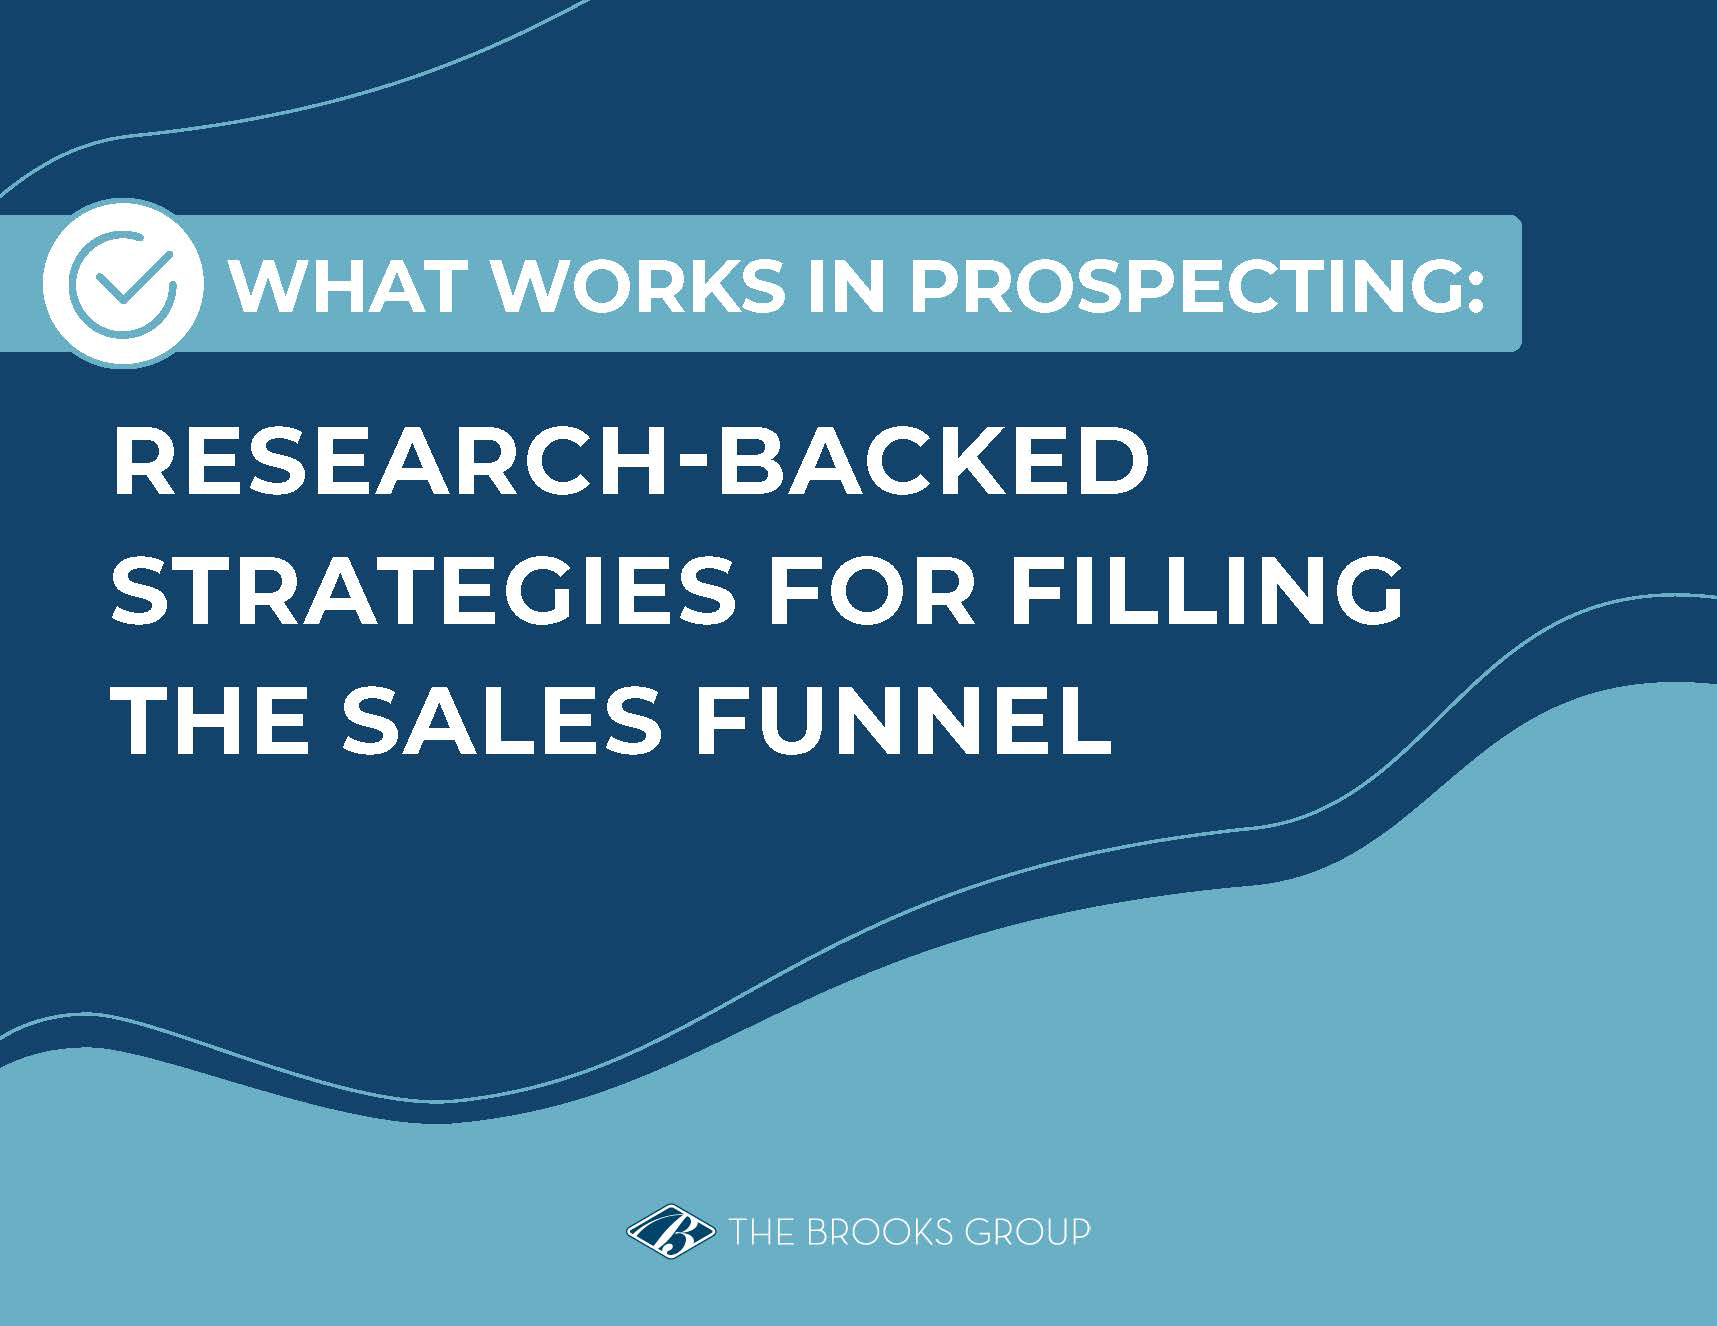 What Works in Prospecting White Paper